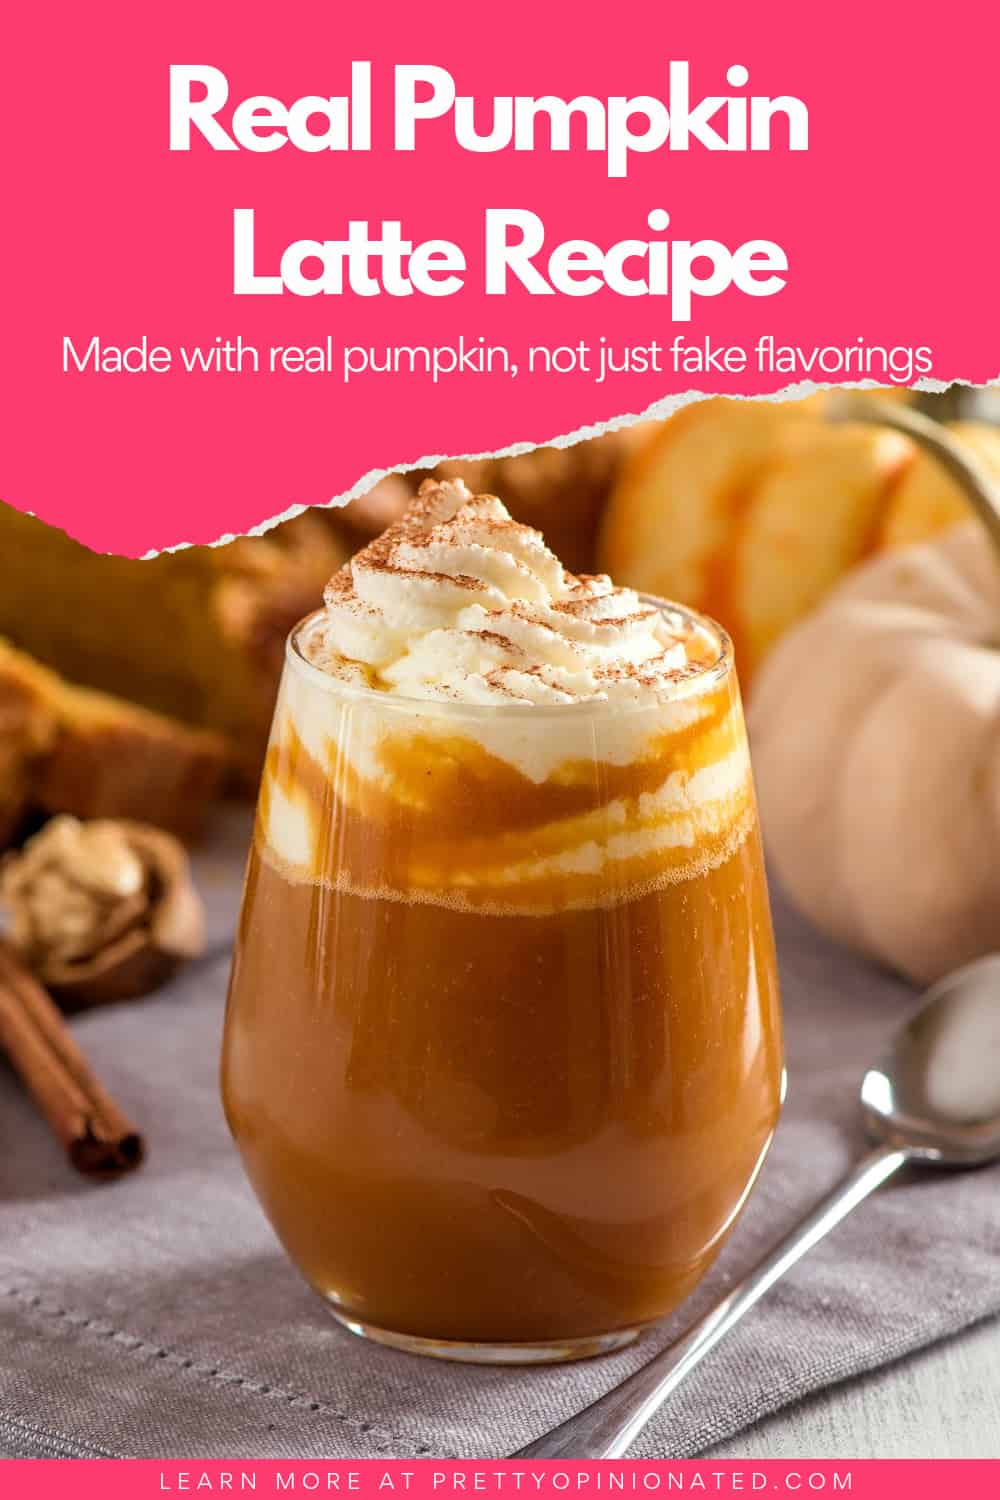 Remaining Forget those lattes made with "pumpkin flavor." This one uses real ingredients for the perfect pumpkin mocha latte. It's cheap and easy to make, too! Check it out!